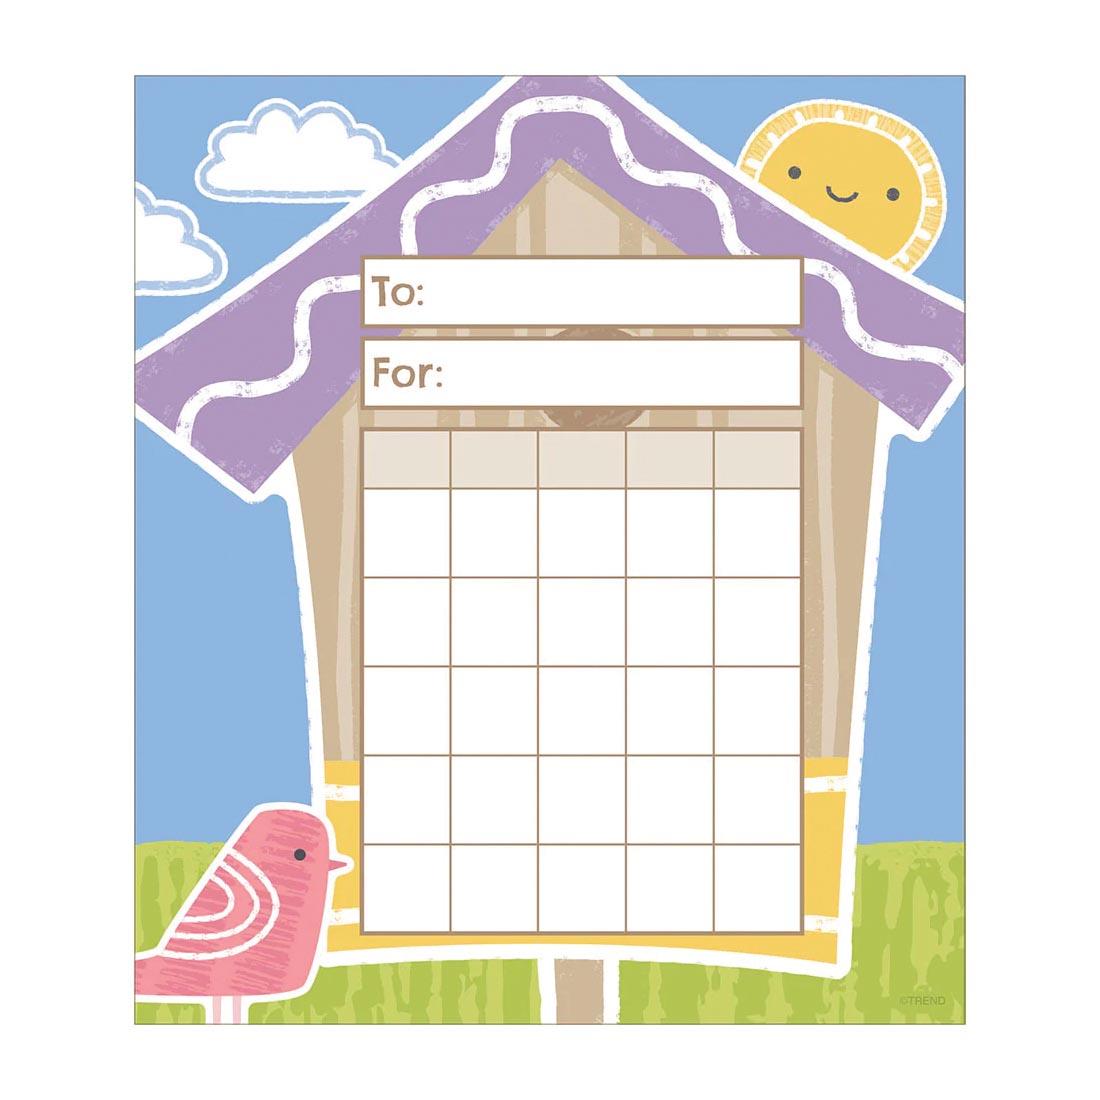 Garden Birdhouse Incentive Pad from the Good To Grow collection by TREND